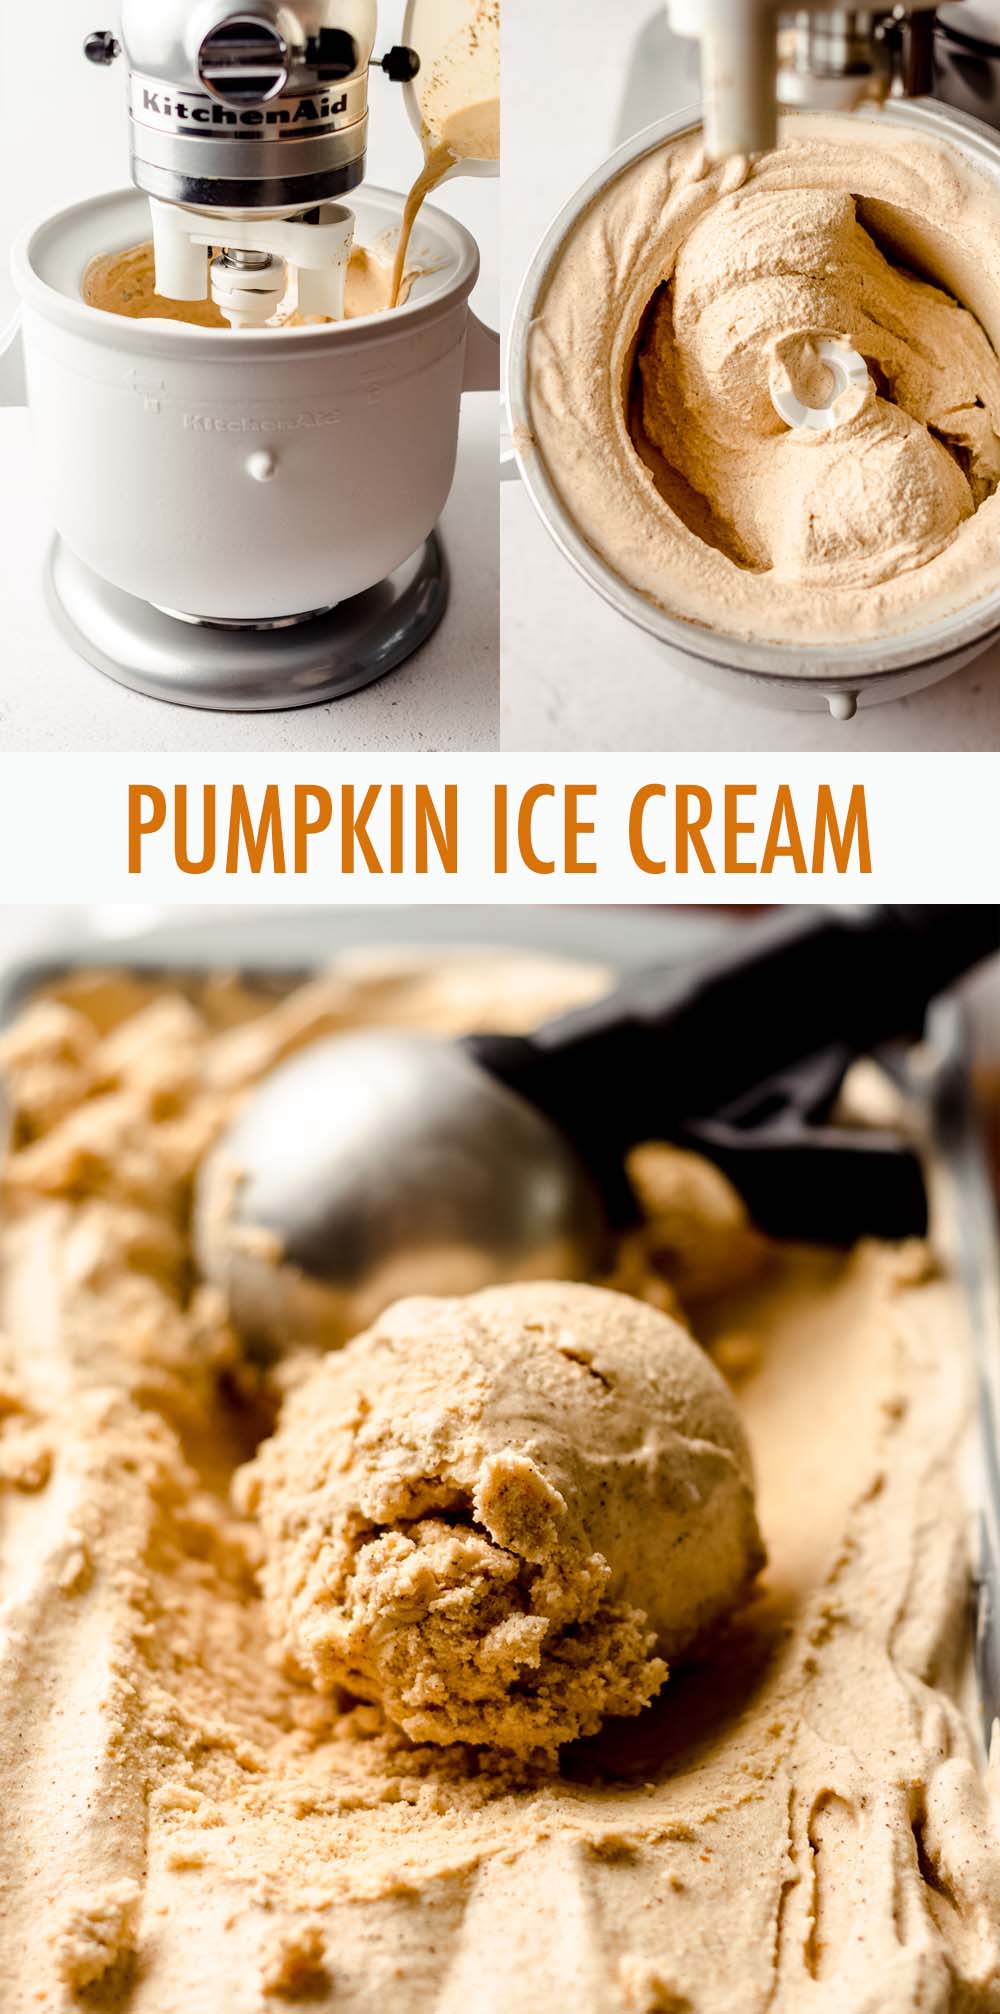 Smooth and creamy homemade ice cream made with real pumpkin, sweetened with brown sugar, and spiced with cinnamon and pumpkin pie spice. Get your pumpkin ice cream fix any time of the year with this simple recipe! via @frshaprilflours